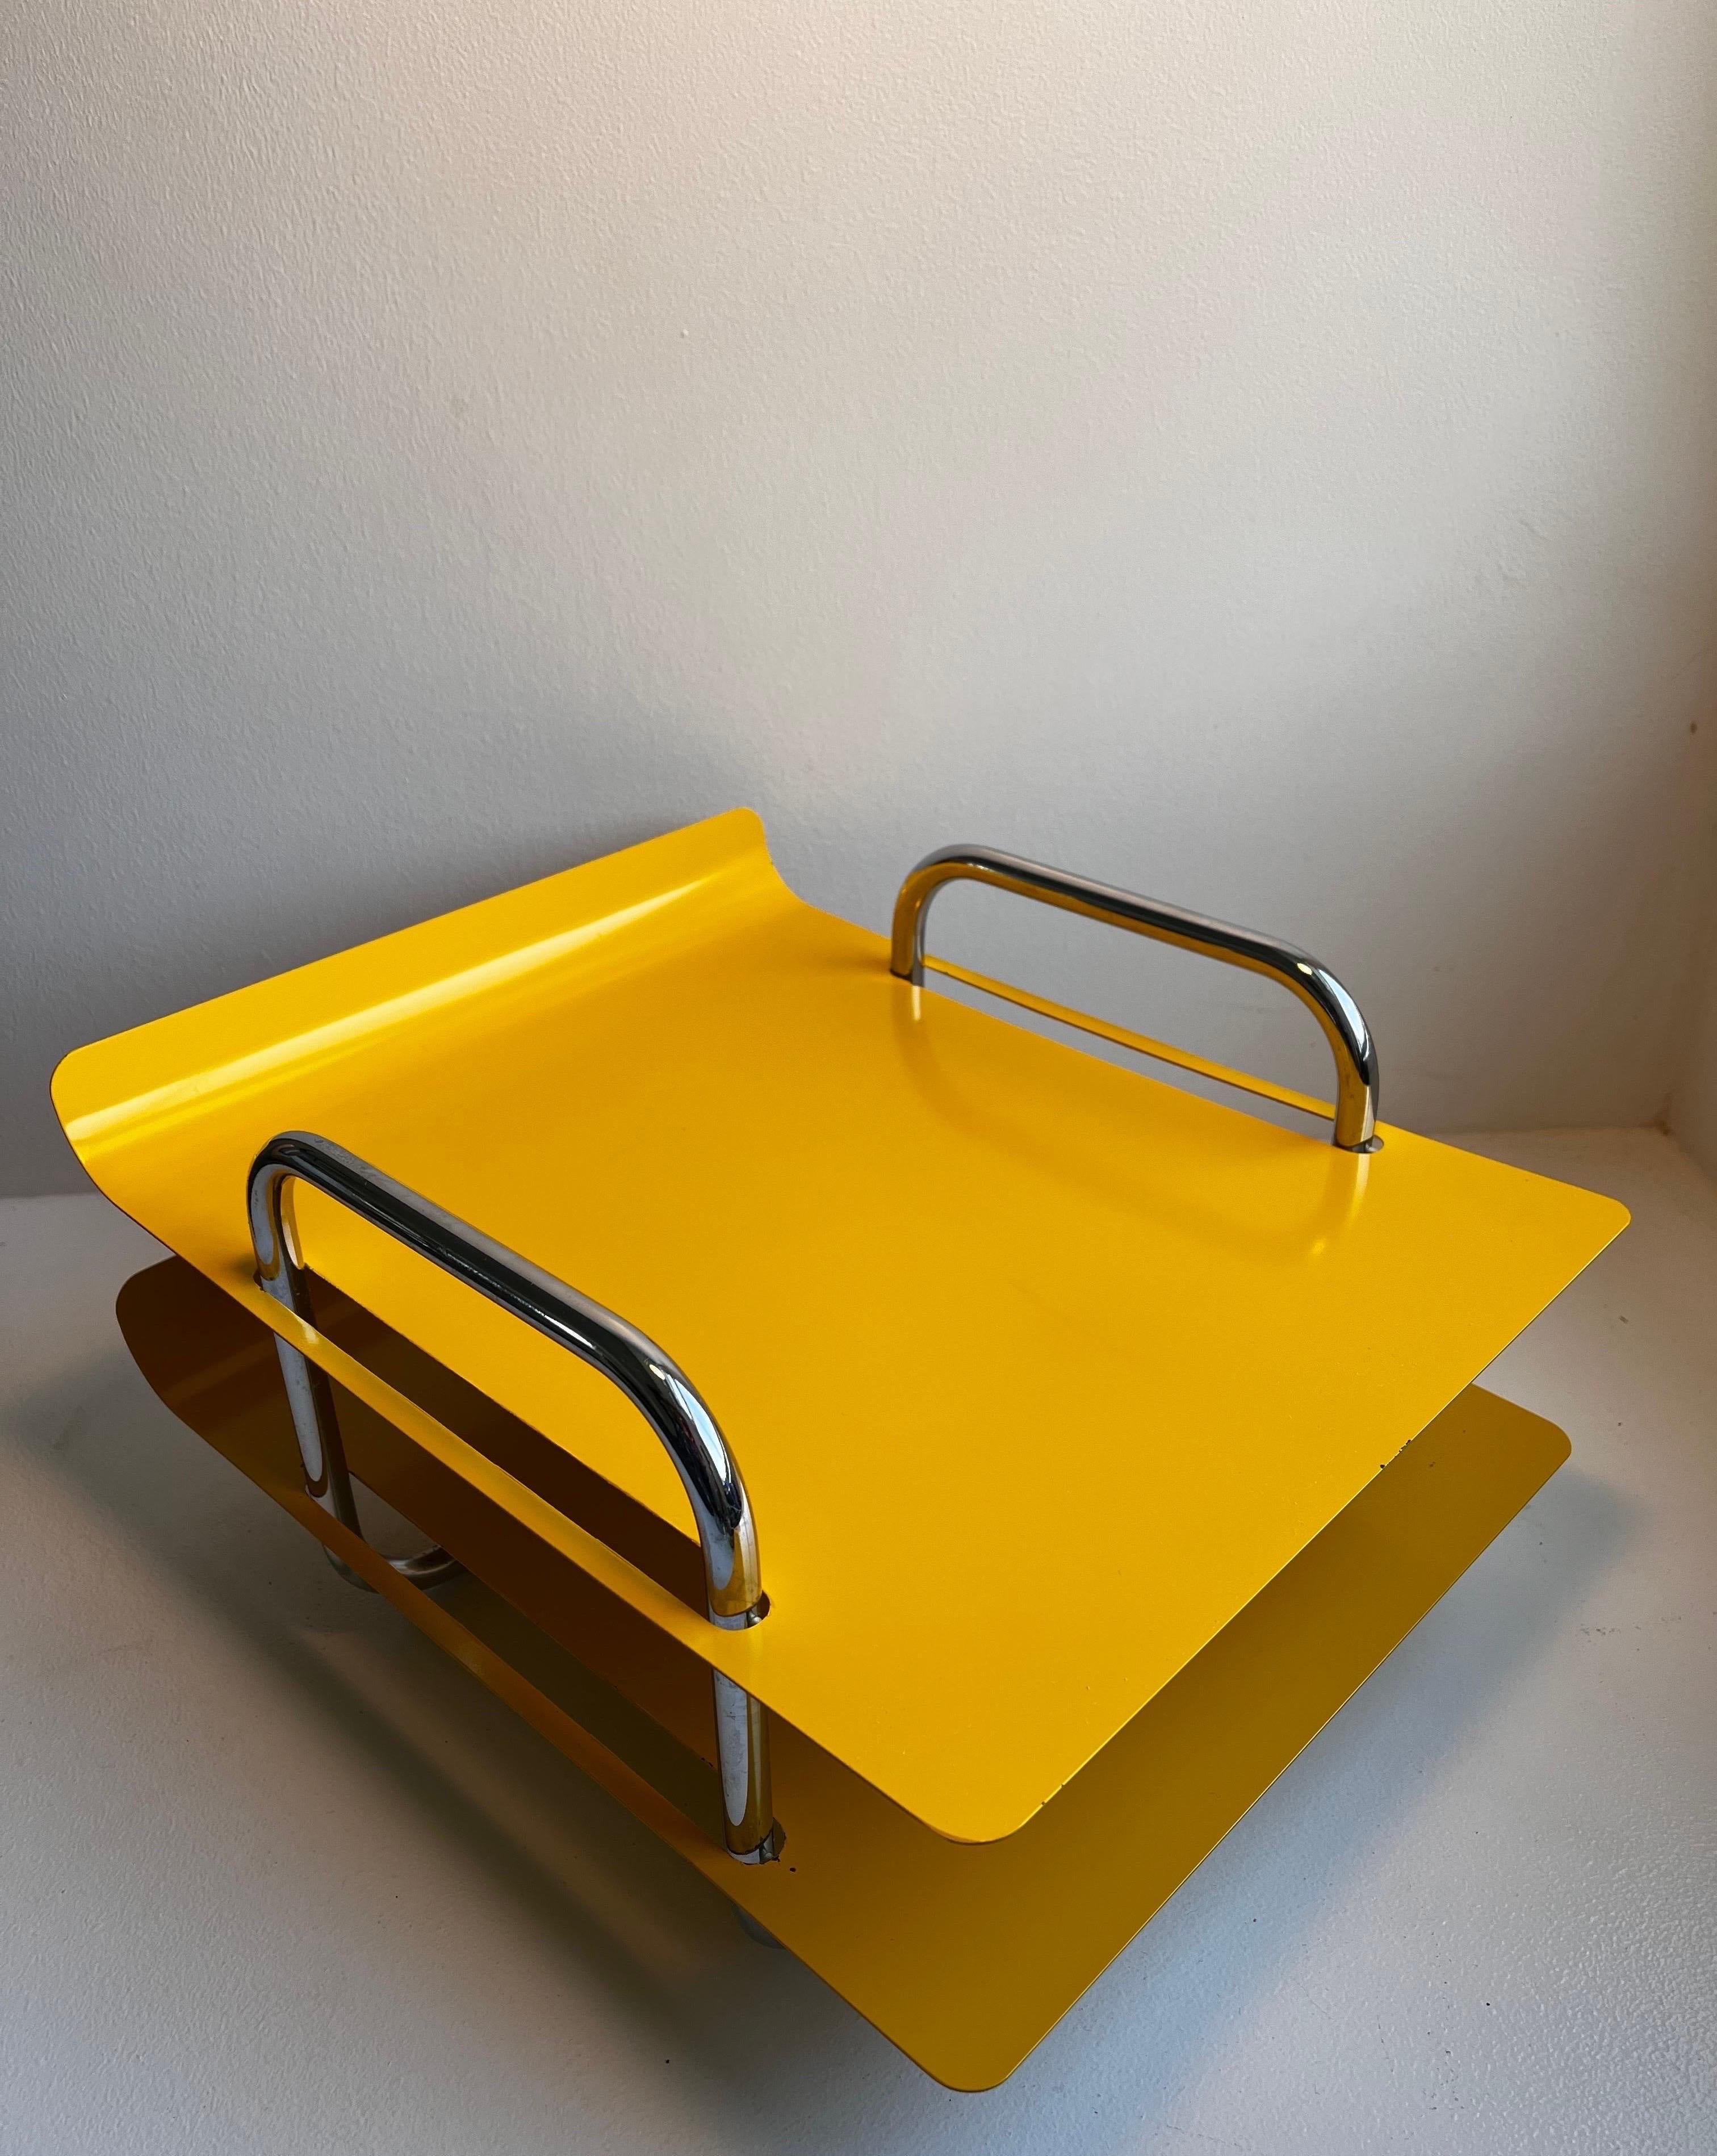 Double Letter Desk Tray by Peter Pepper Products of California

